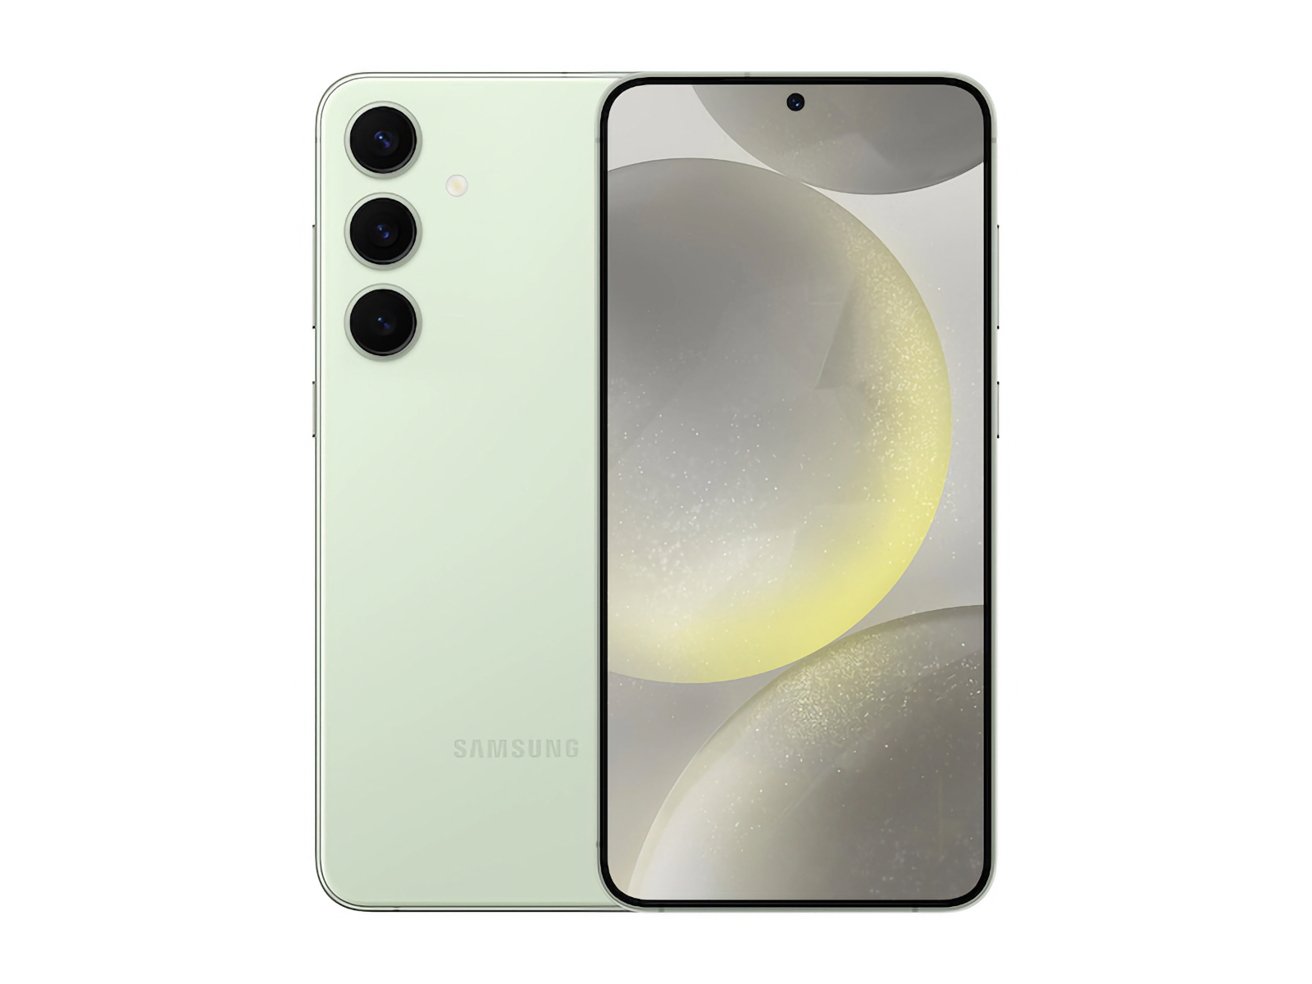 A mint green Samsung smartphone with a triple-camera setup on the back and a screen displaying a graphic of abstract circles with a gradient from yellow to gray.